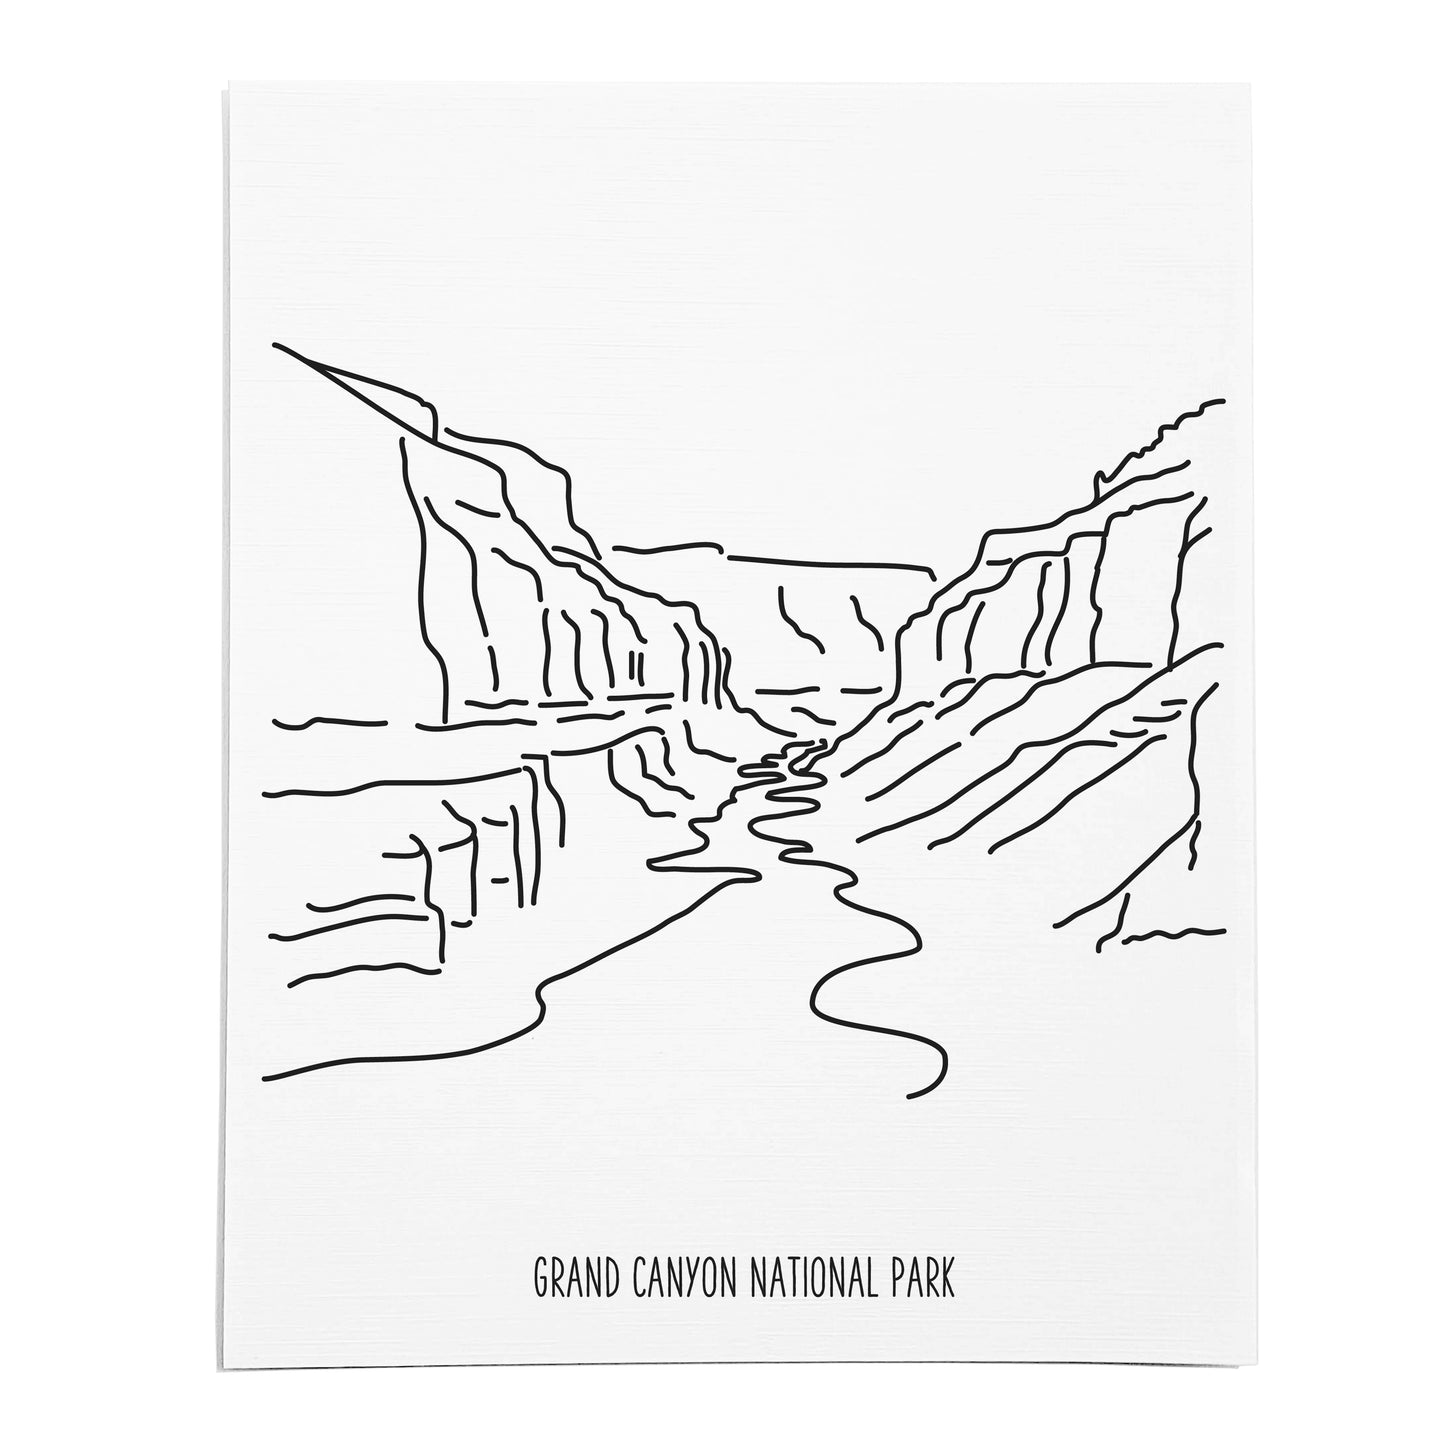 An art print featuring a line drawing of Grand Canyon National Park on white linen paper